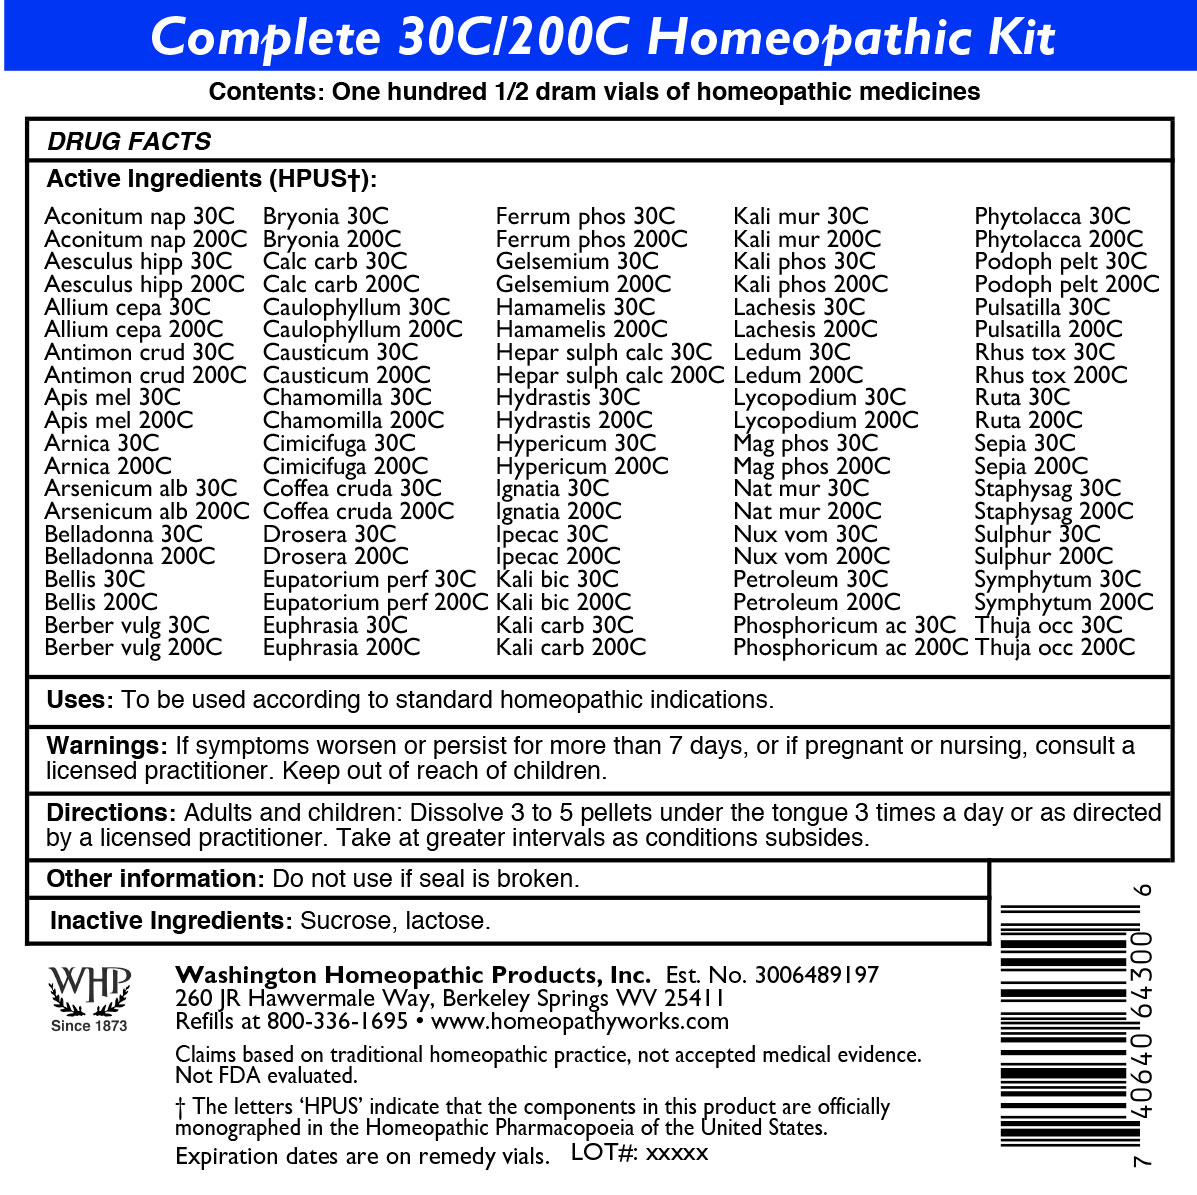 Complete 30c/200c Homeopathic Kit